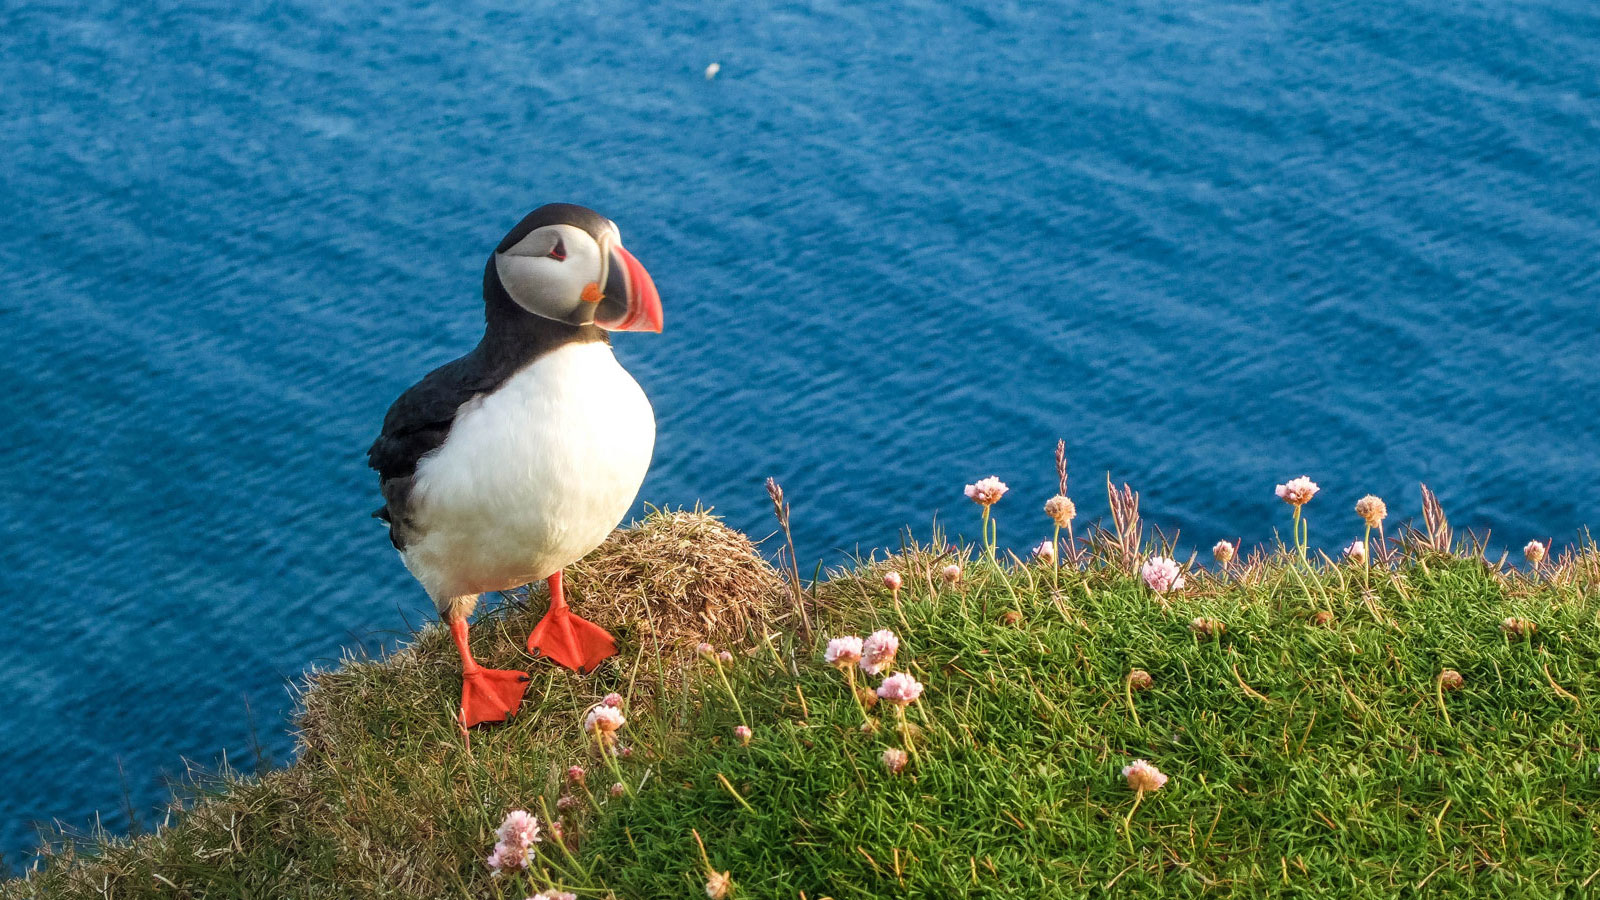 A Puffin stands on the edge of the Latrabjarg Puffin Cliffs in Iceland